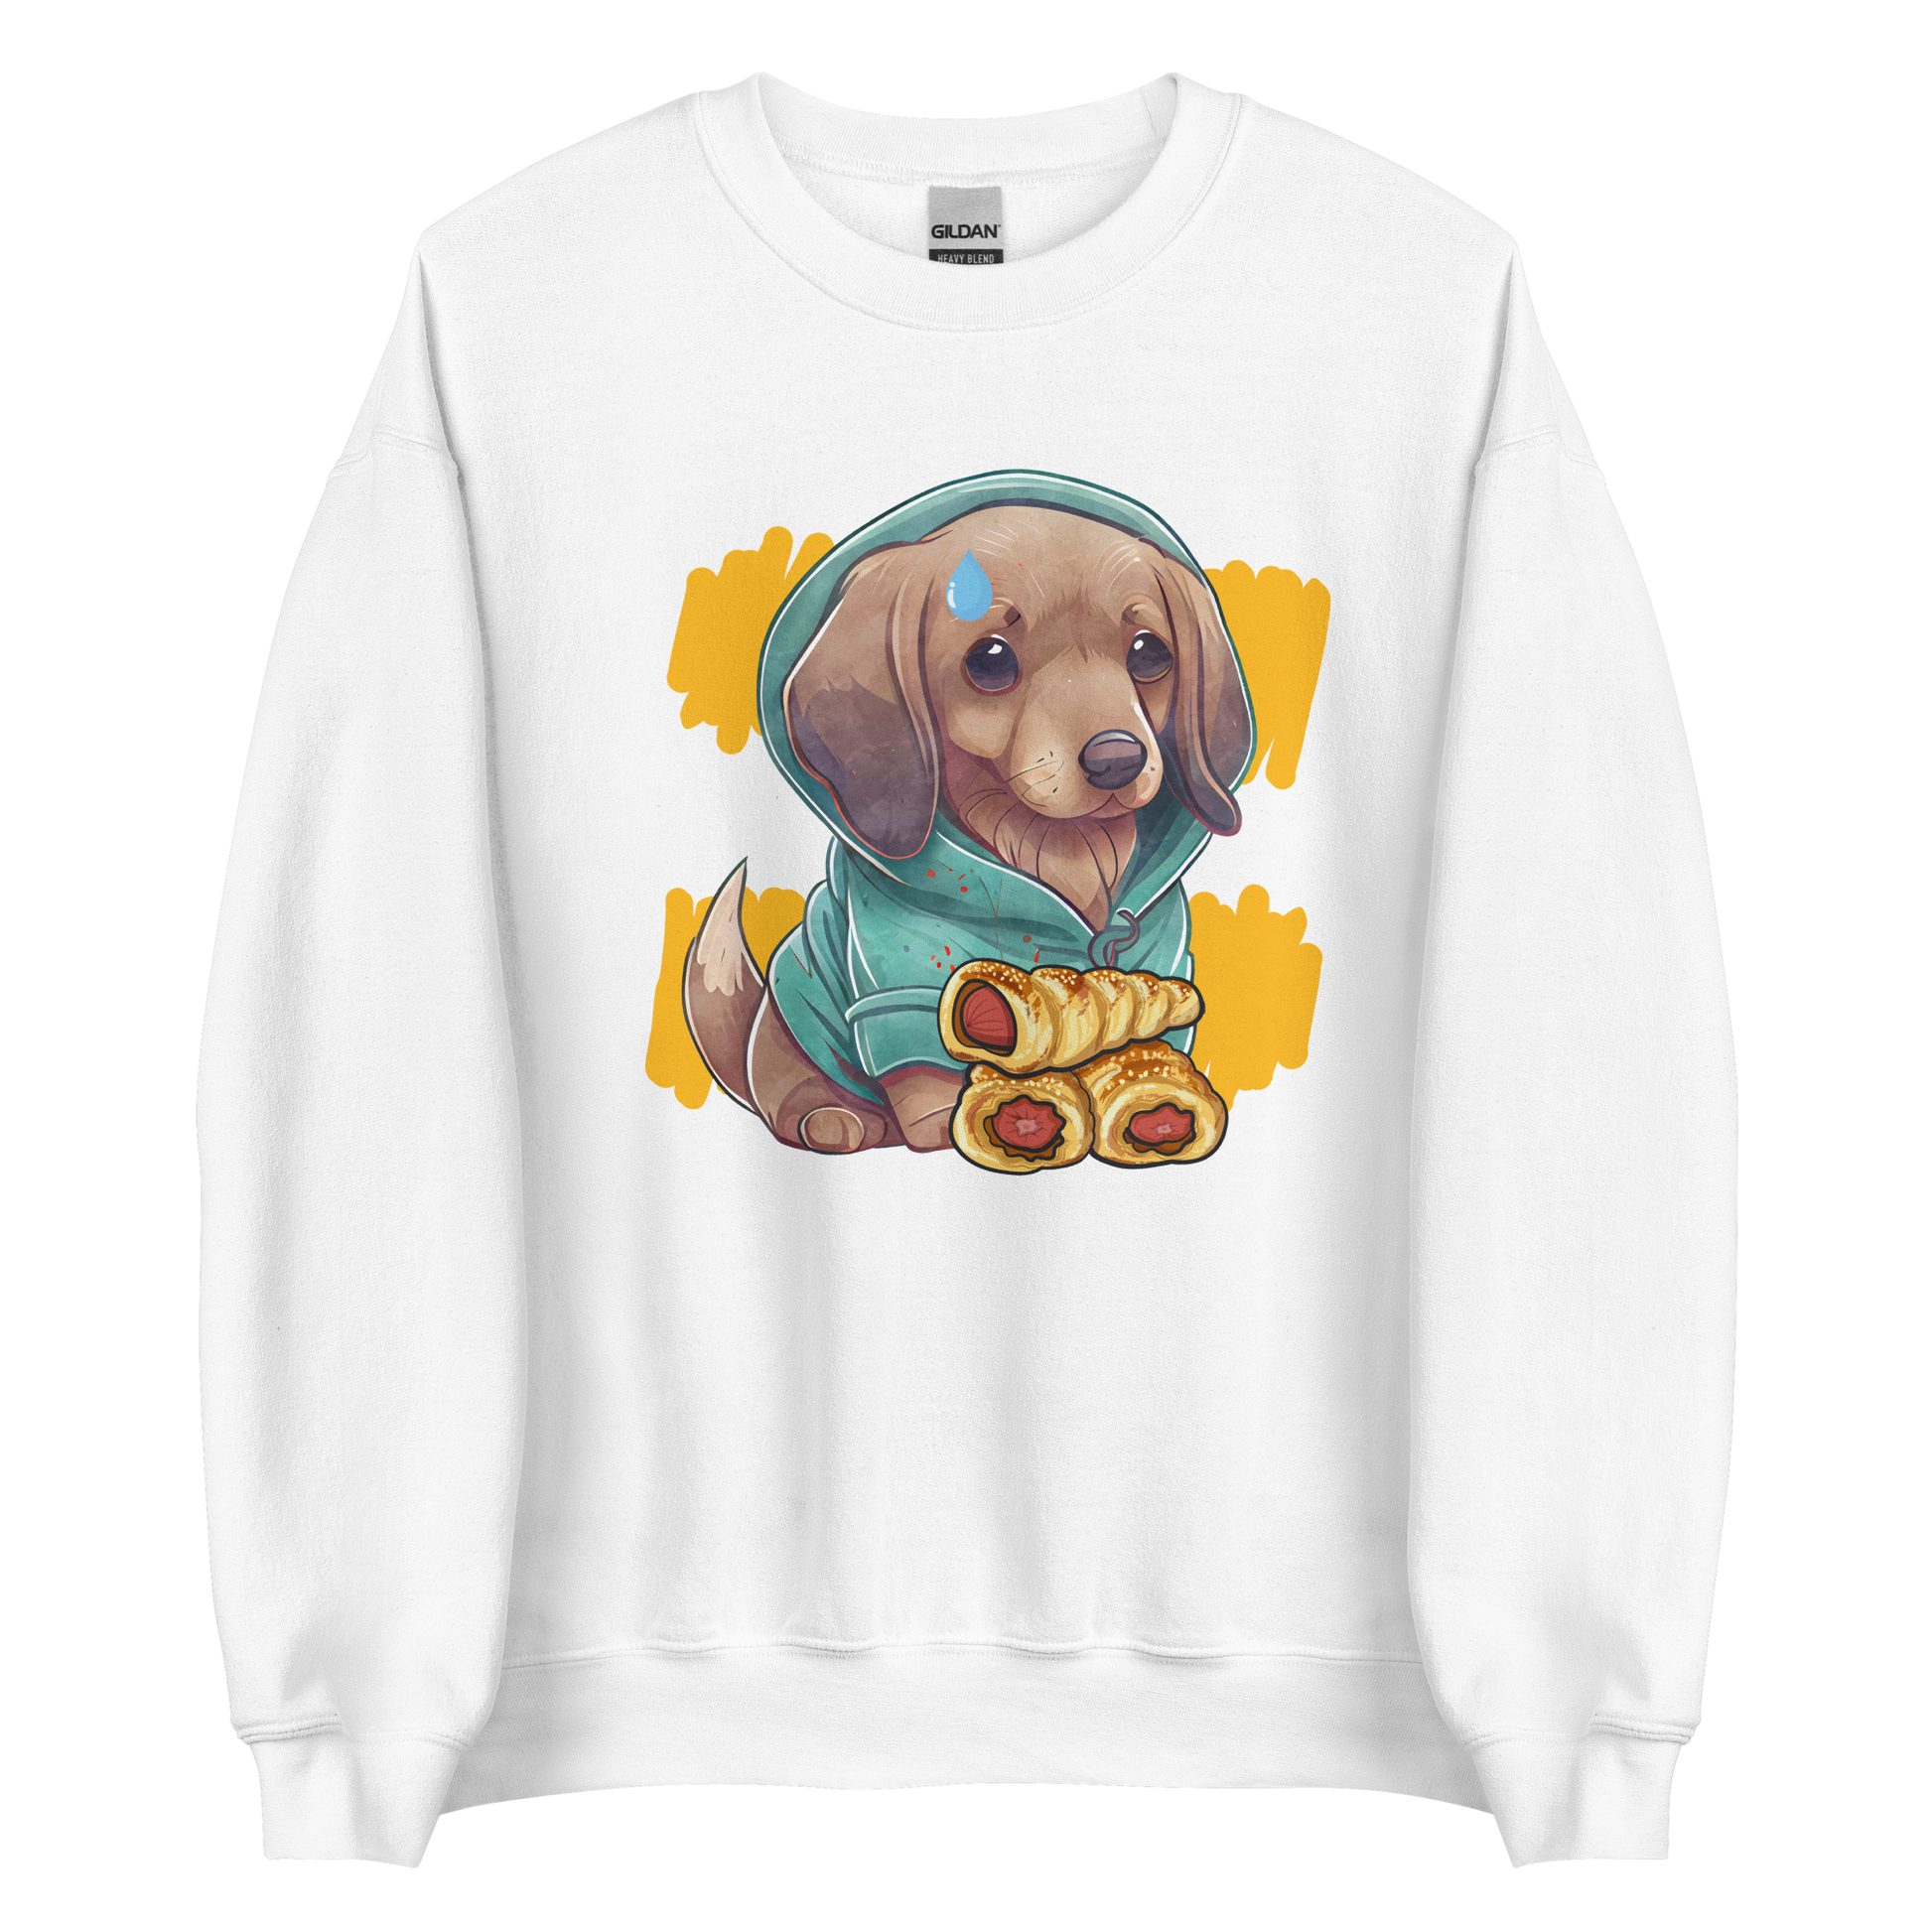 White Sausage Dog Sweatshirt featuring an adorable Sausage Roll Dachshund graphic on the chest - Funny Graphic Sausage Dog Sweatshirts - Boozy Fox